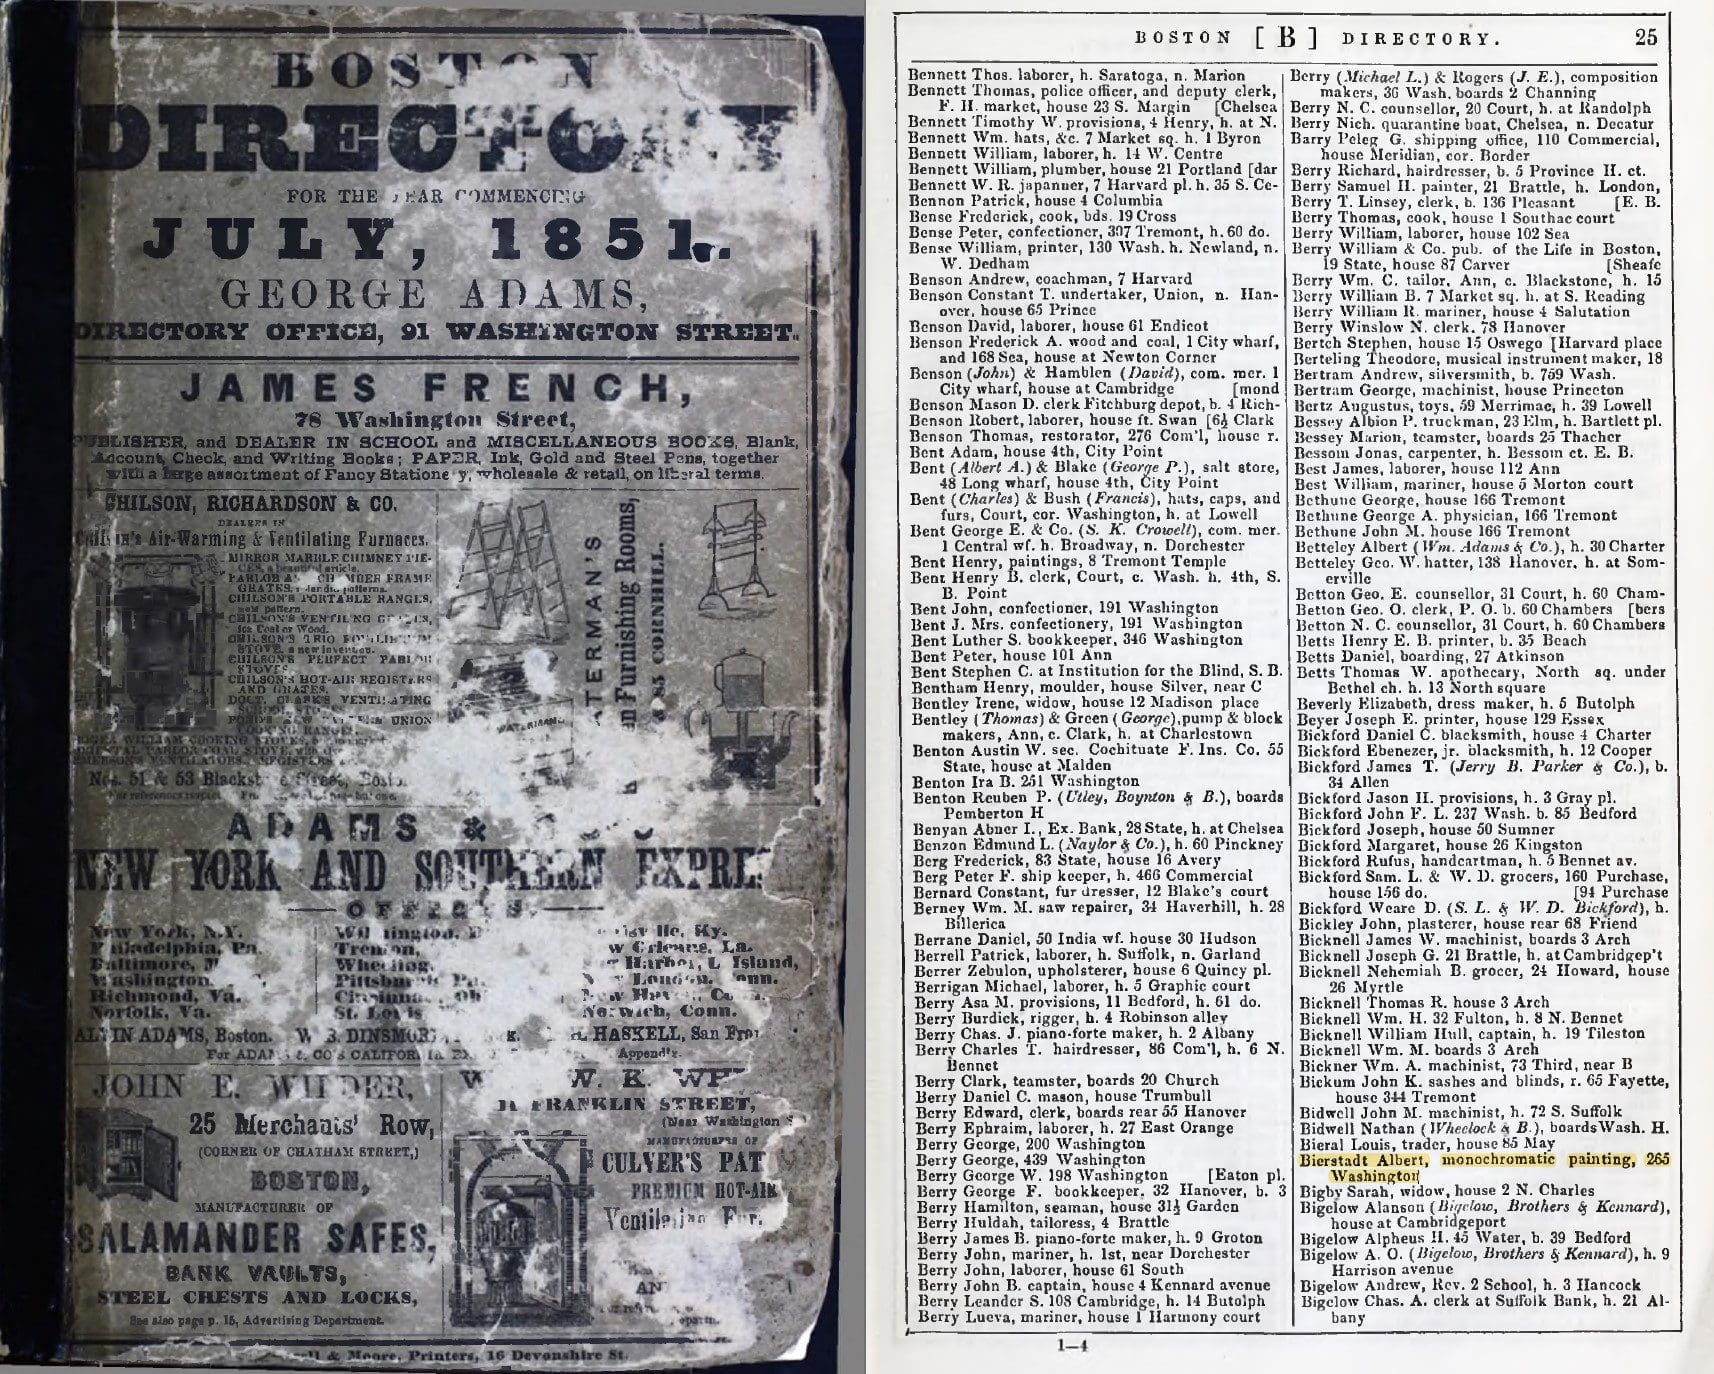 Albert Bierstadt listed in the 1851 Boston City Directory